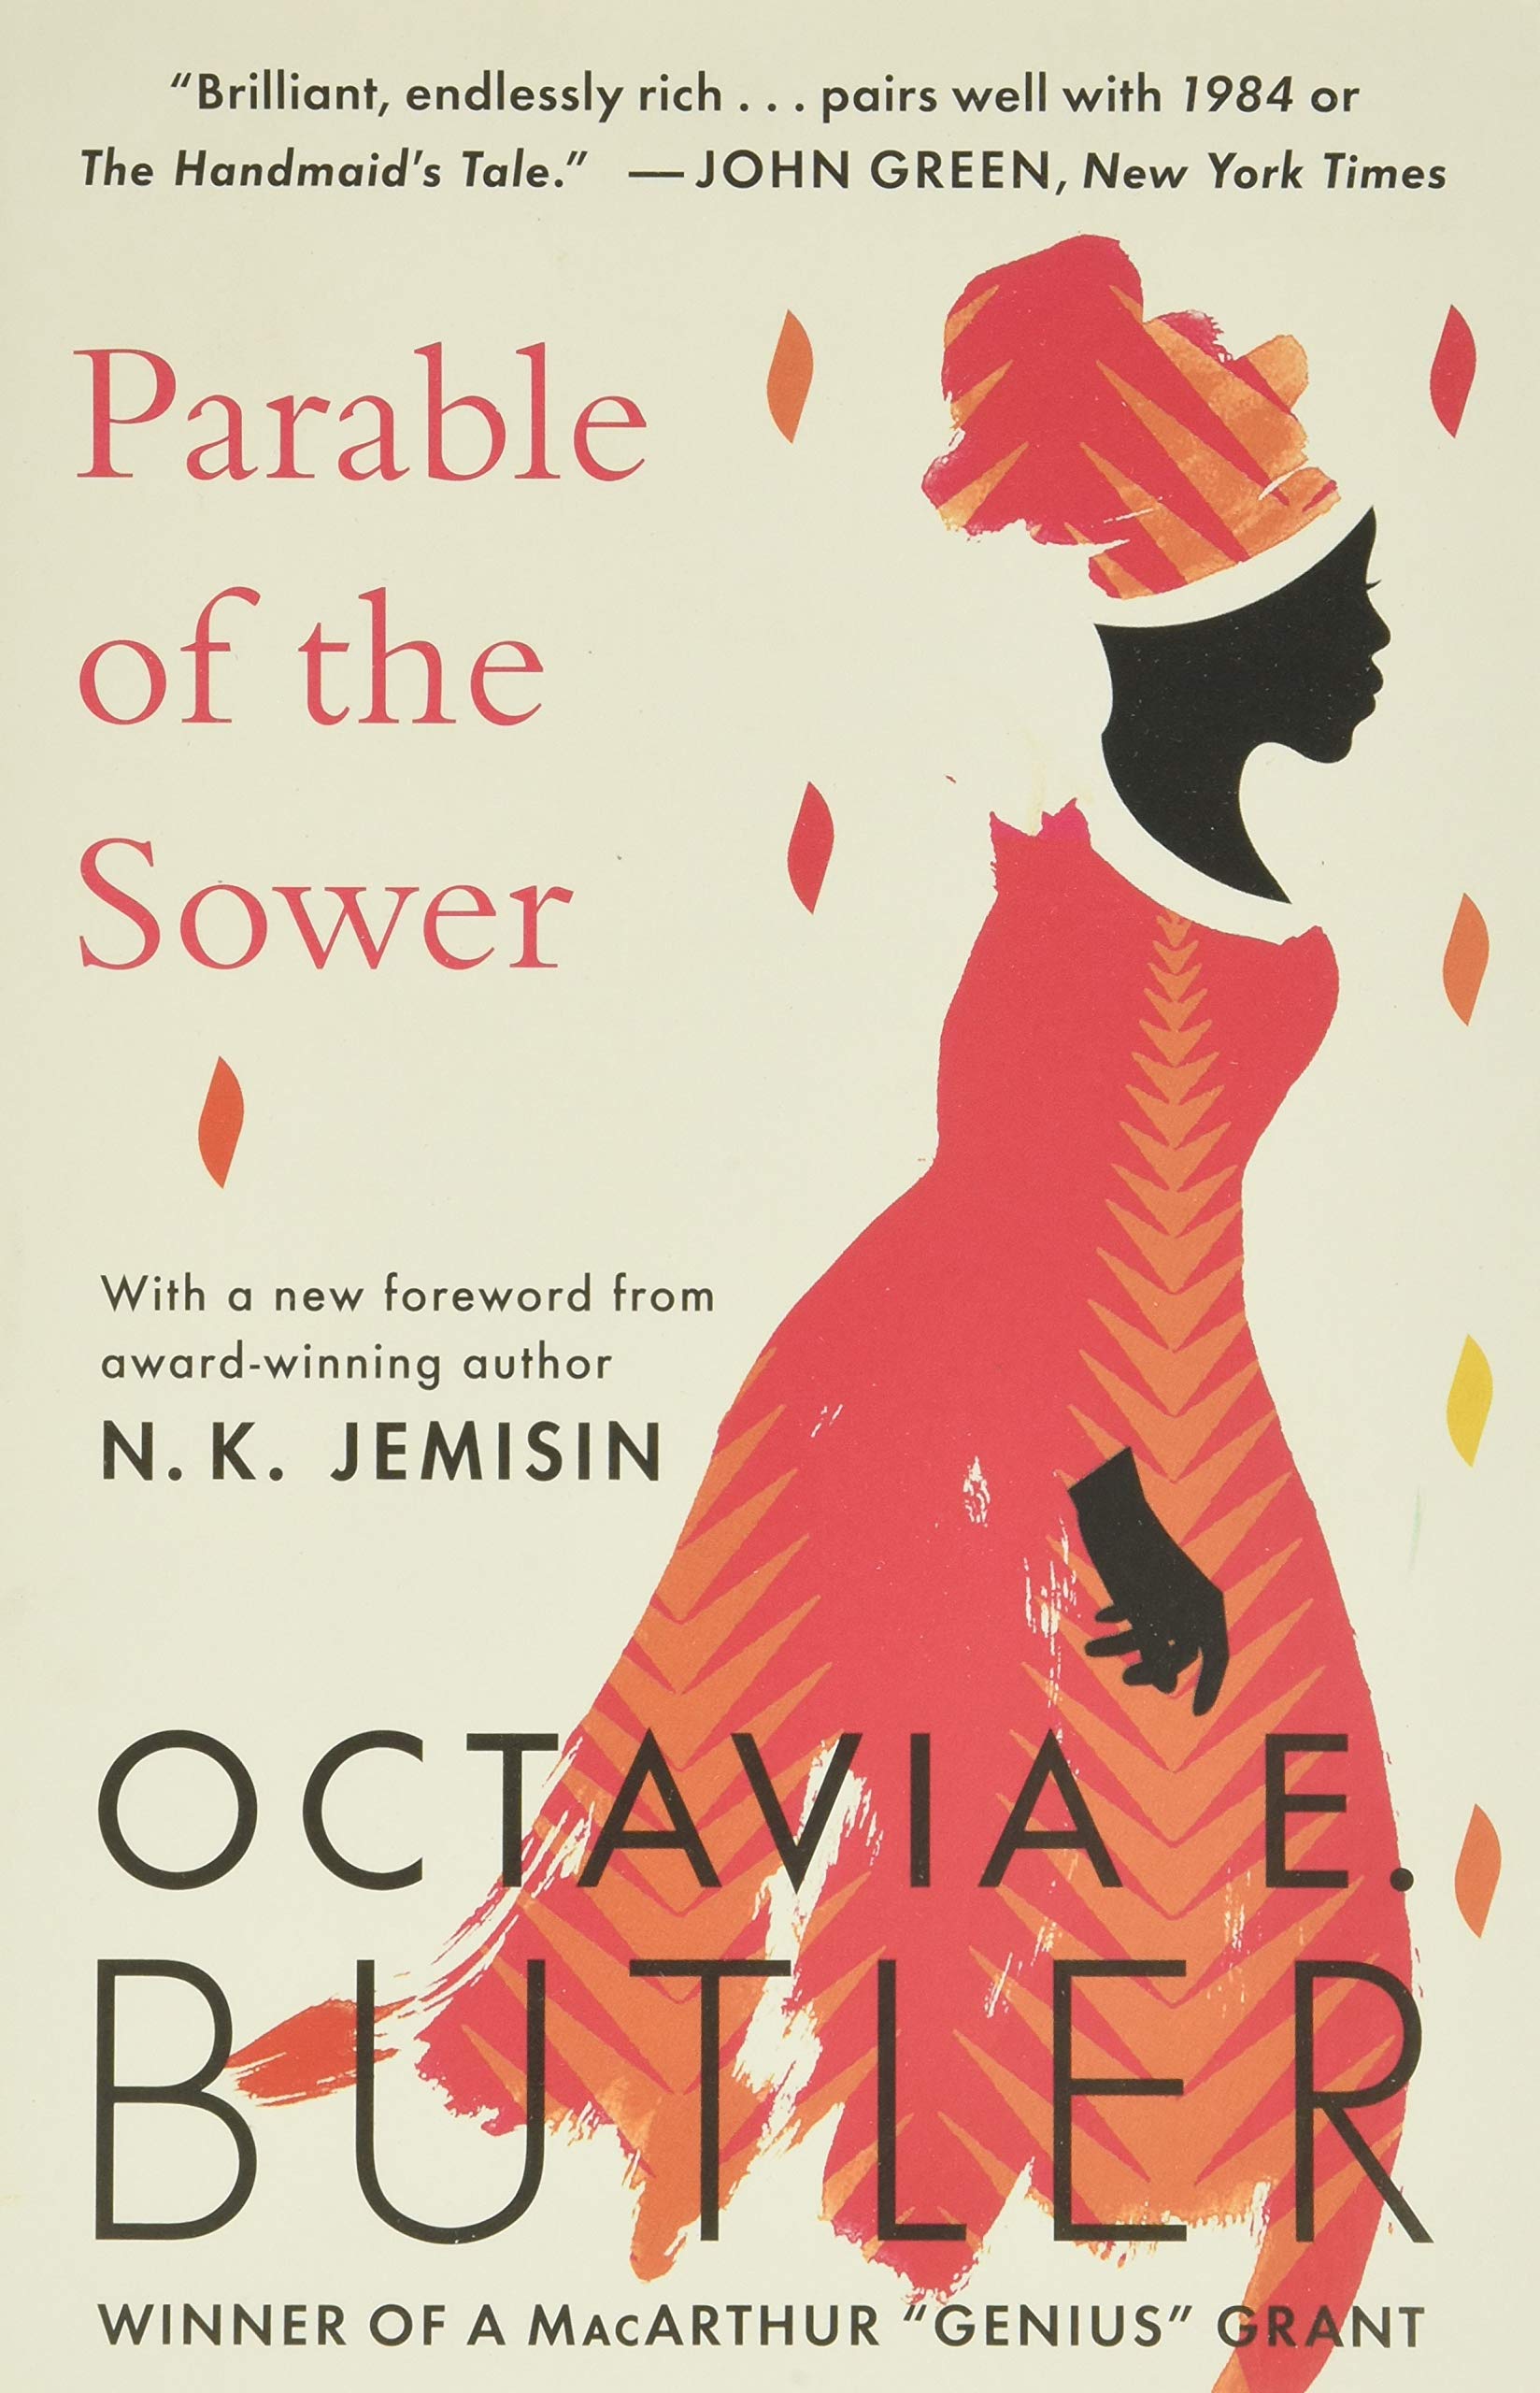 Parable of the Sower: book recommendation